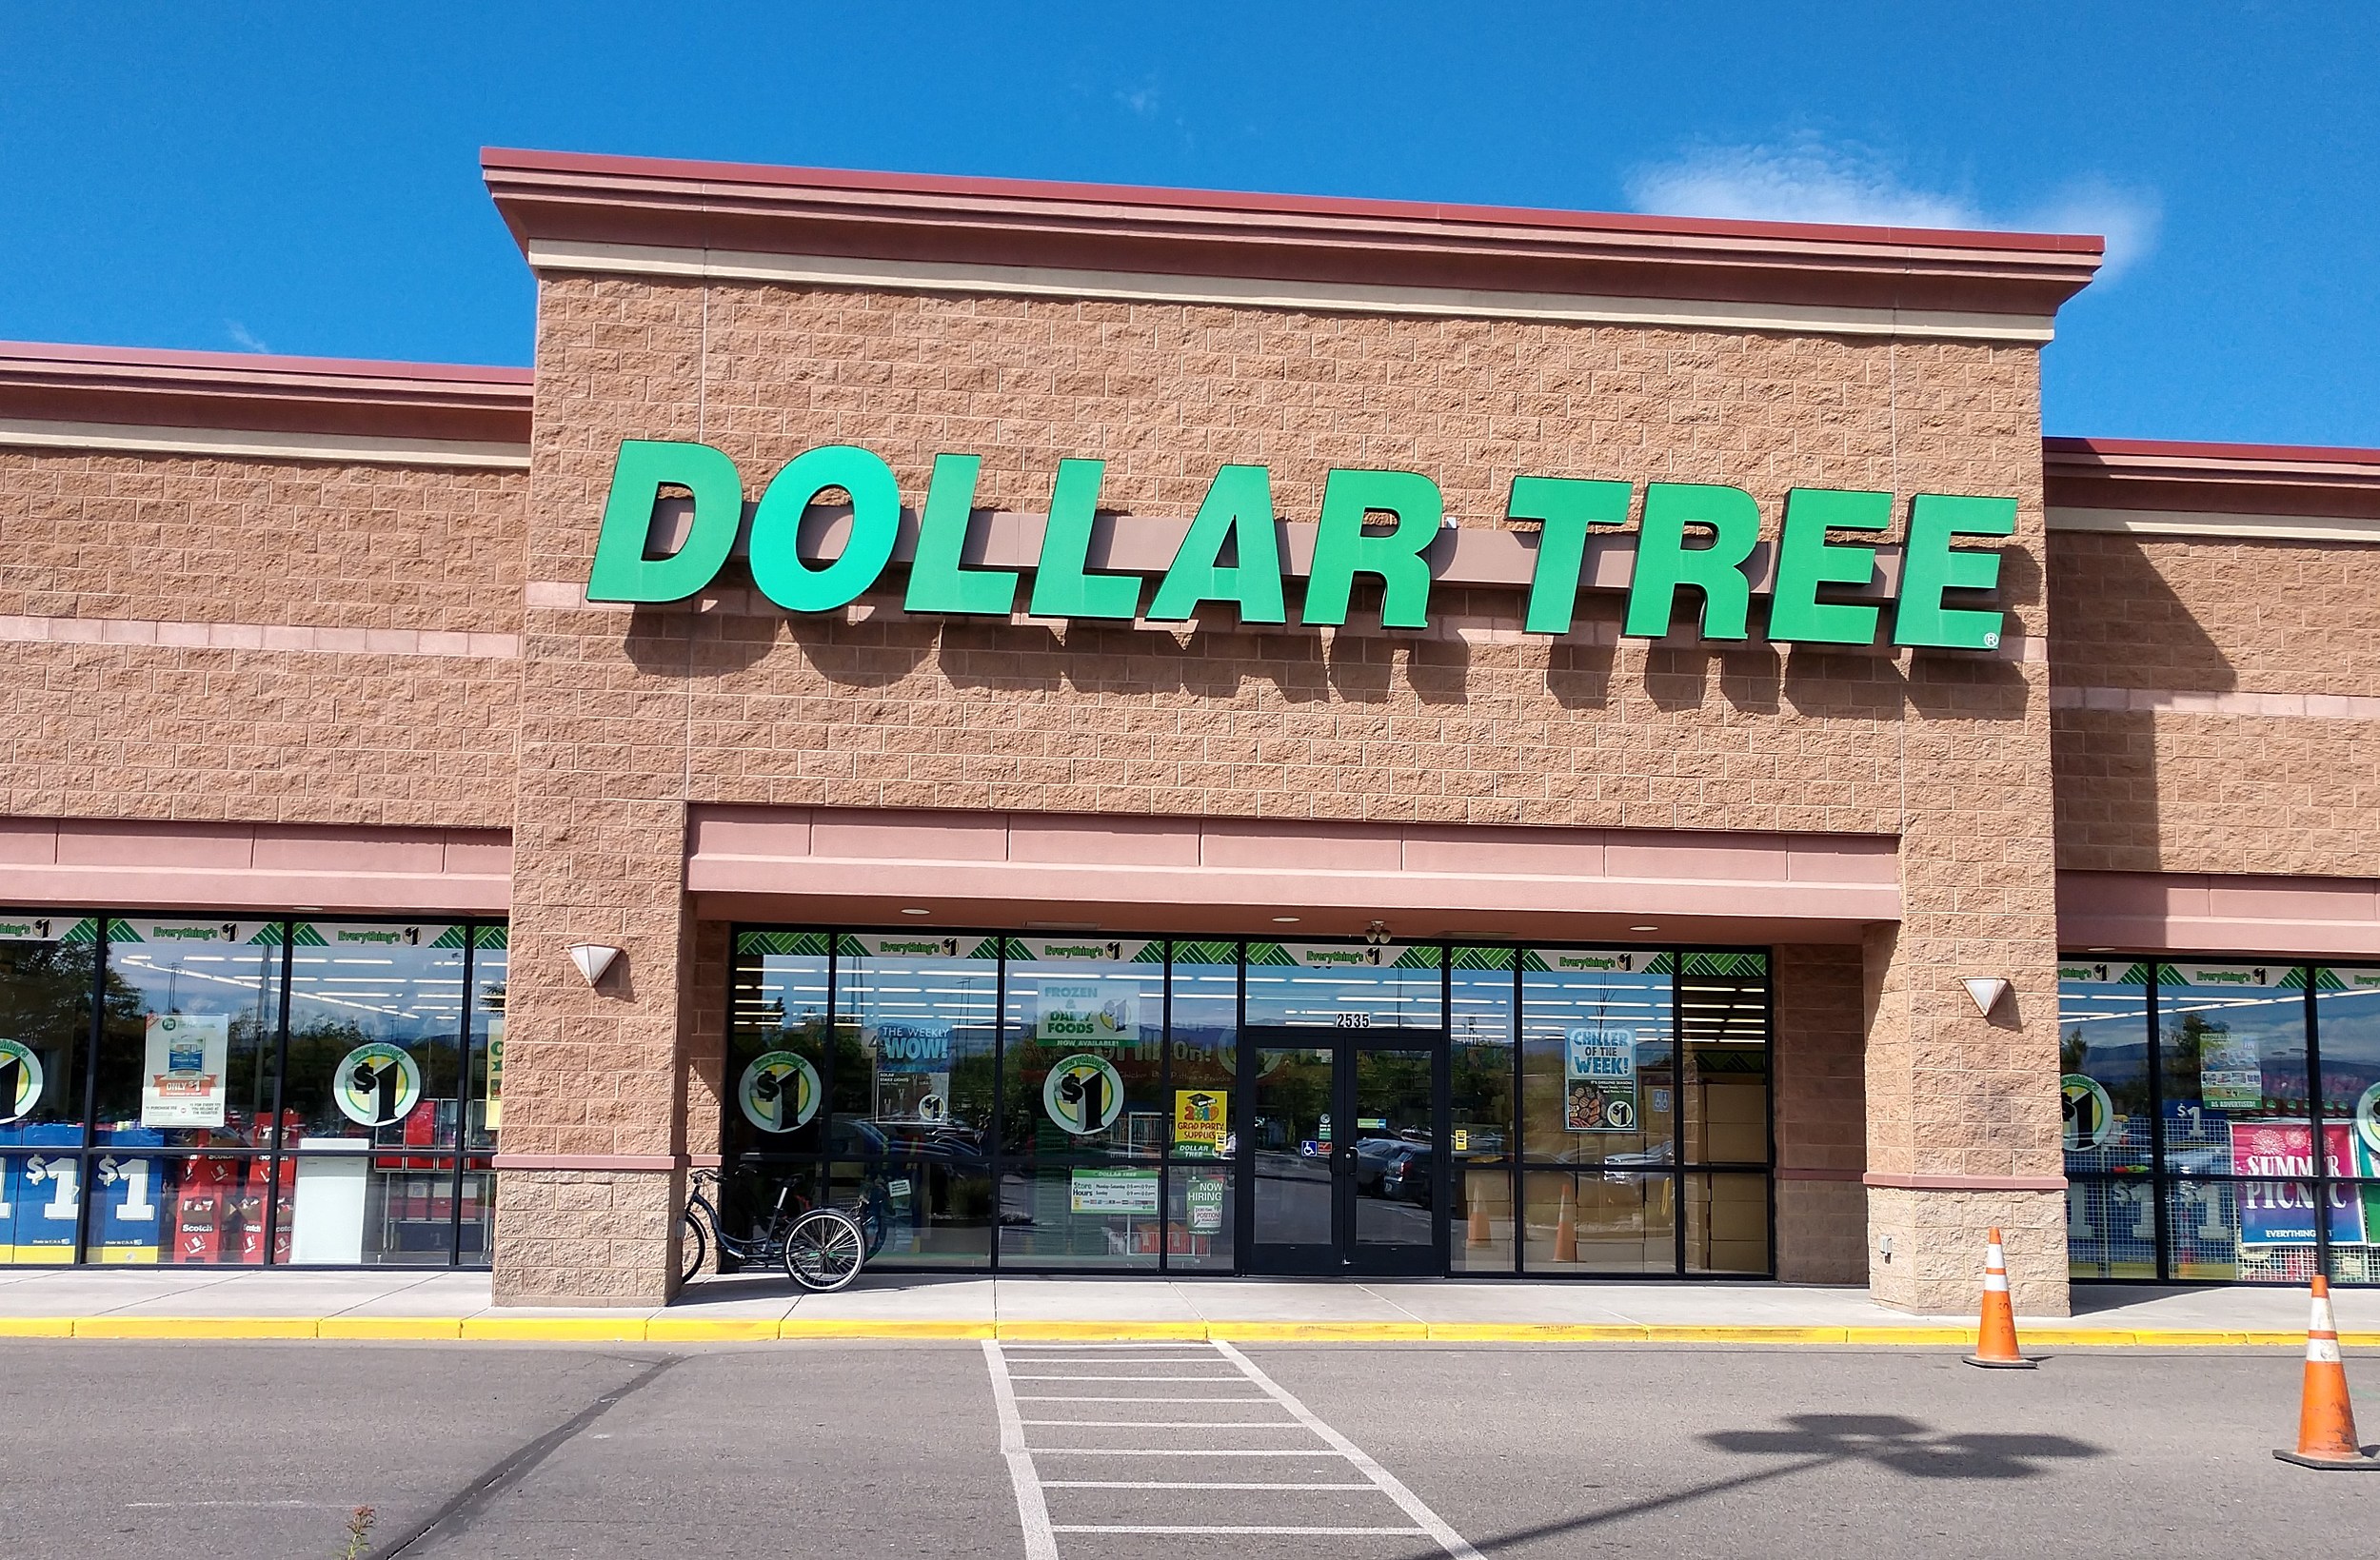 Dollar Tree is Increasing their Prices